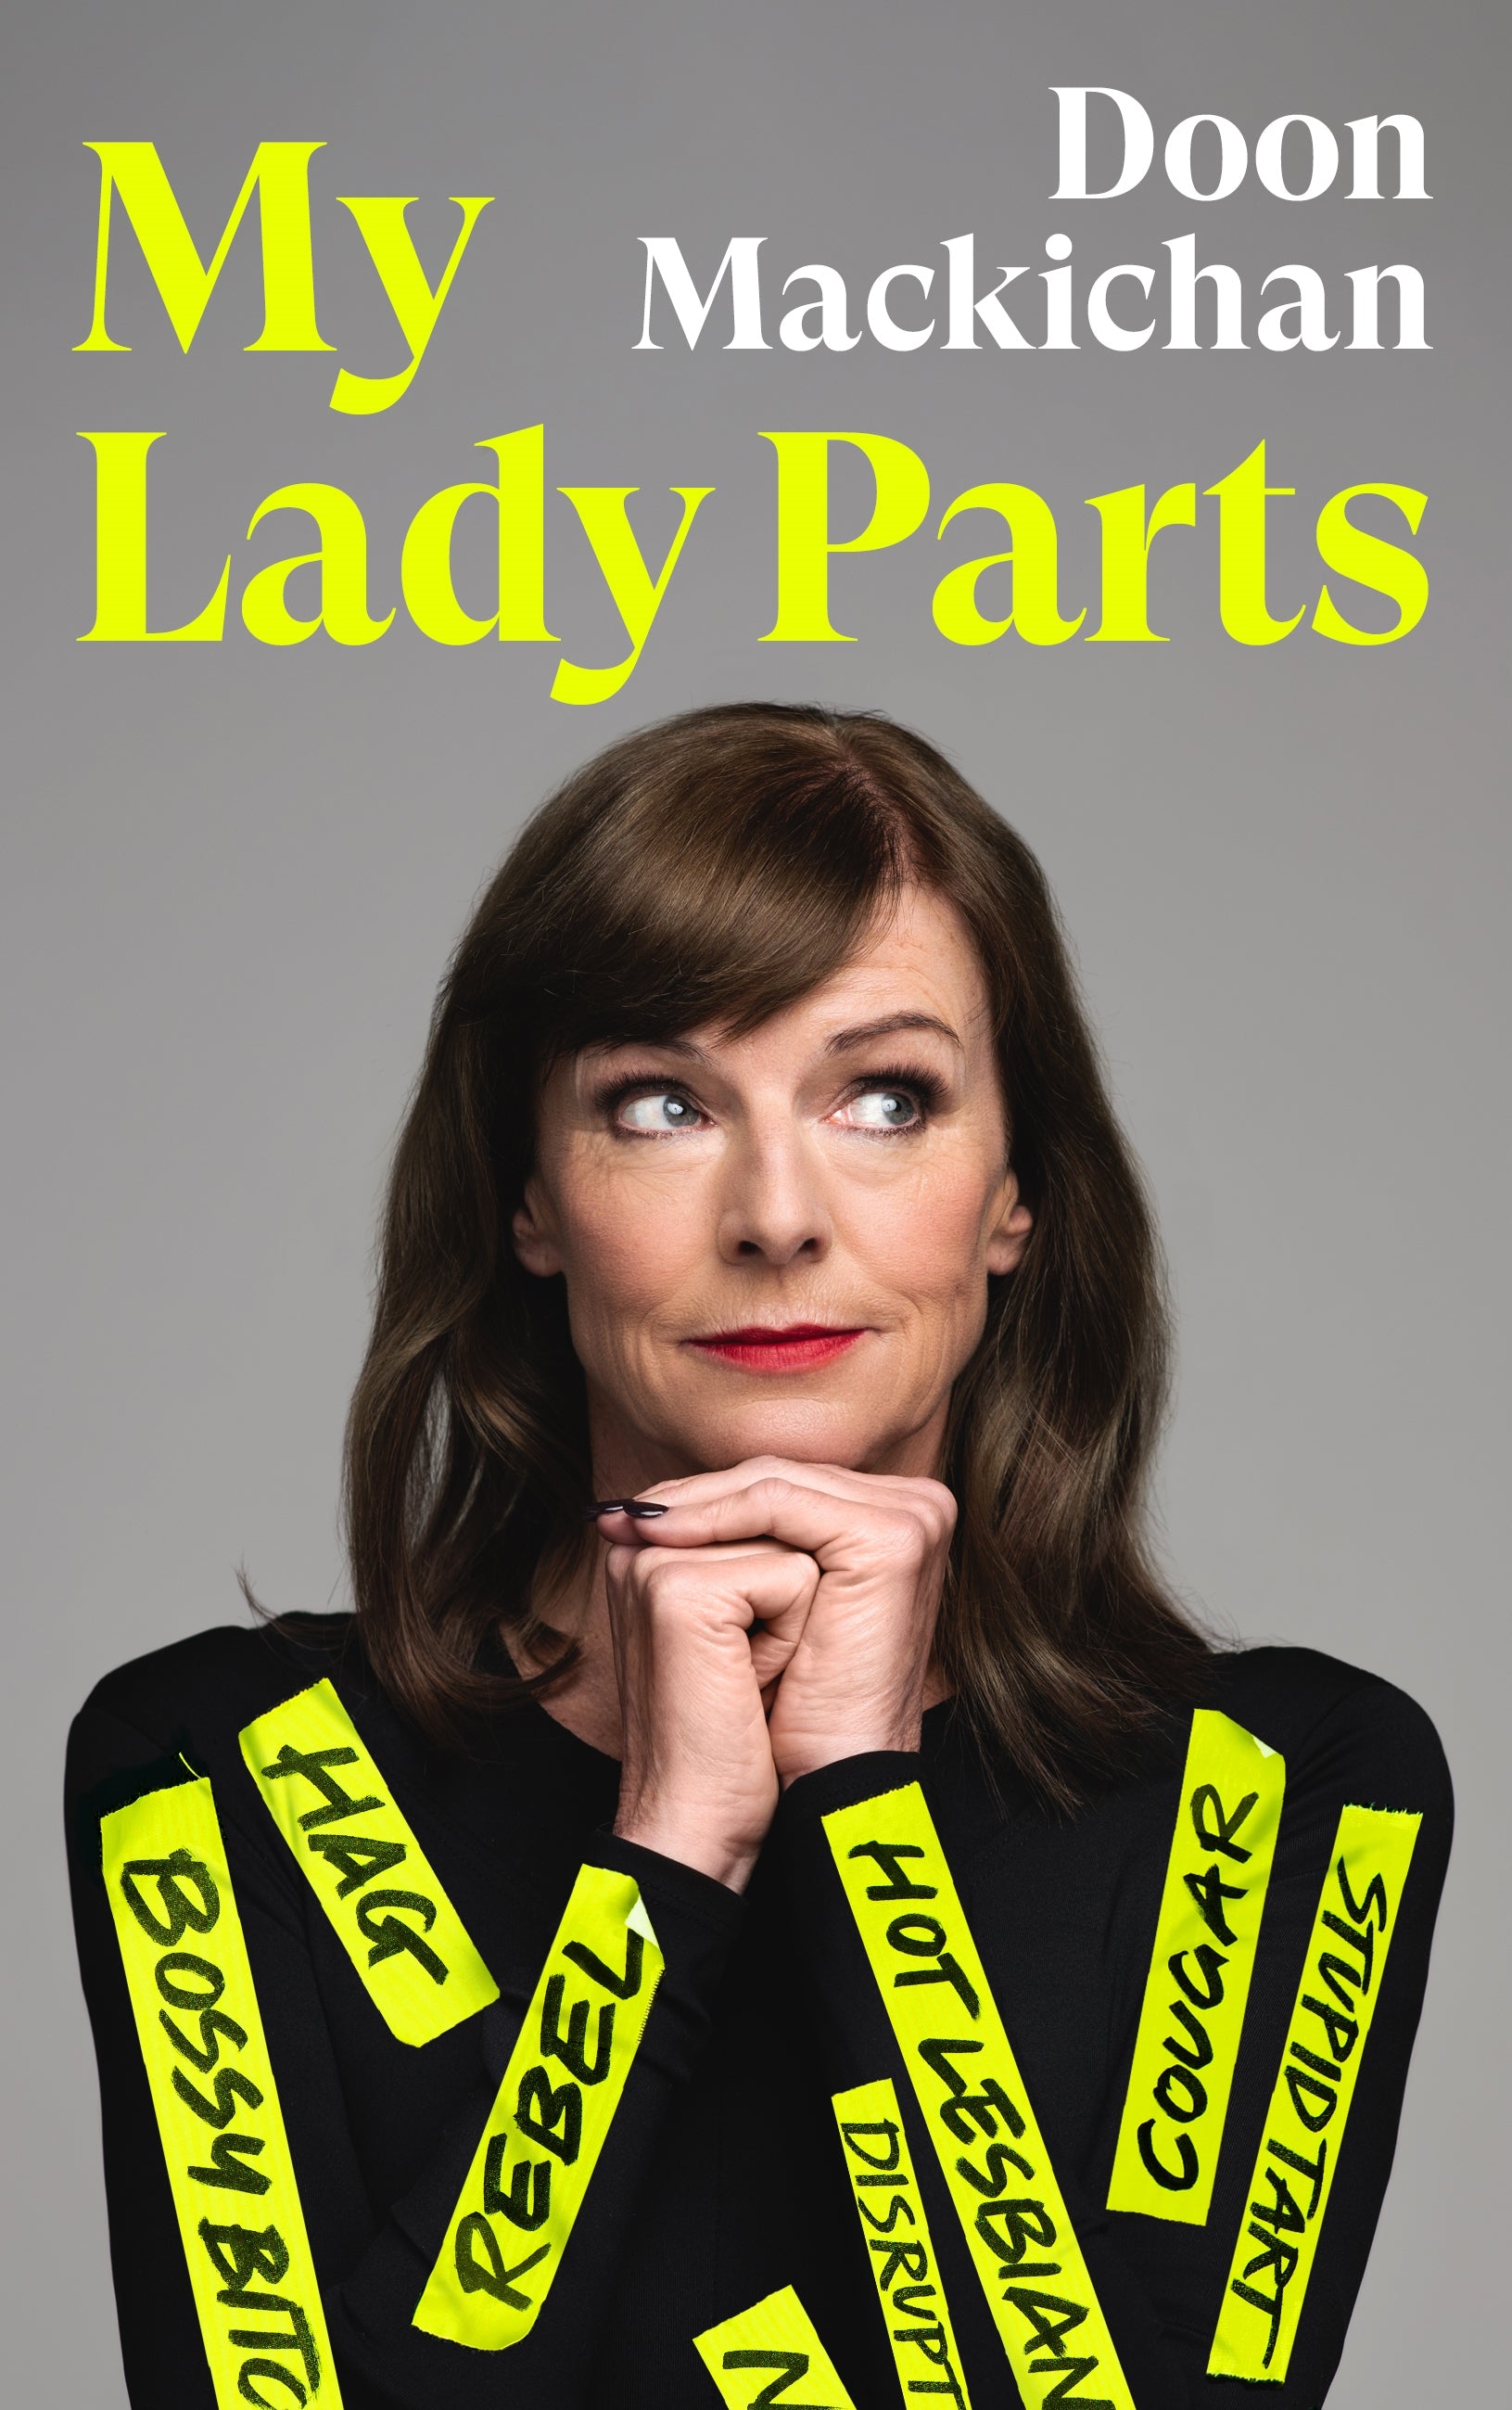 (SIGNED COPY) DOON MACKICHAN: My Lady Parts  A Life Fighting Stereotypes